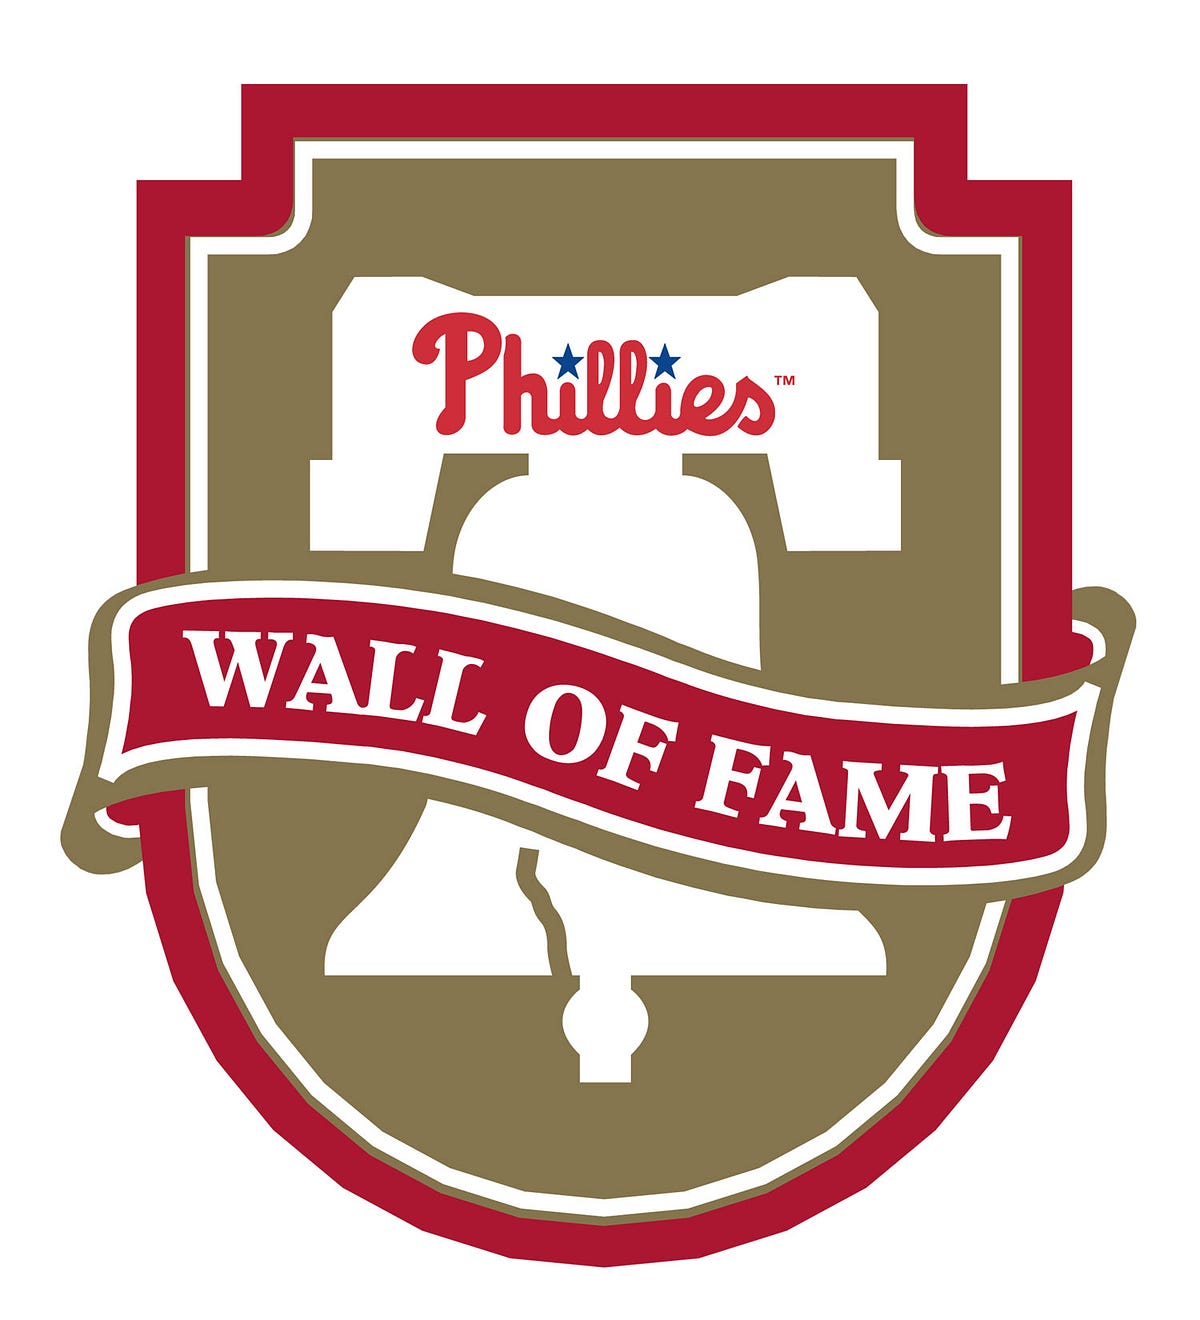 Wall of Fame. The tradition of honoring the greatest… by Larry Shenk